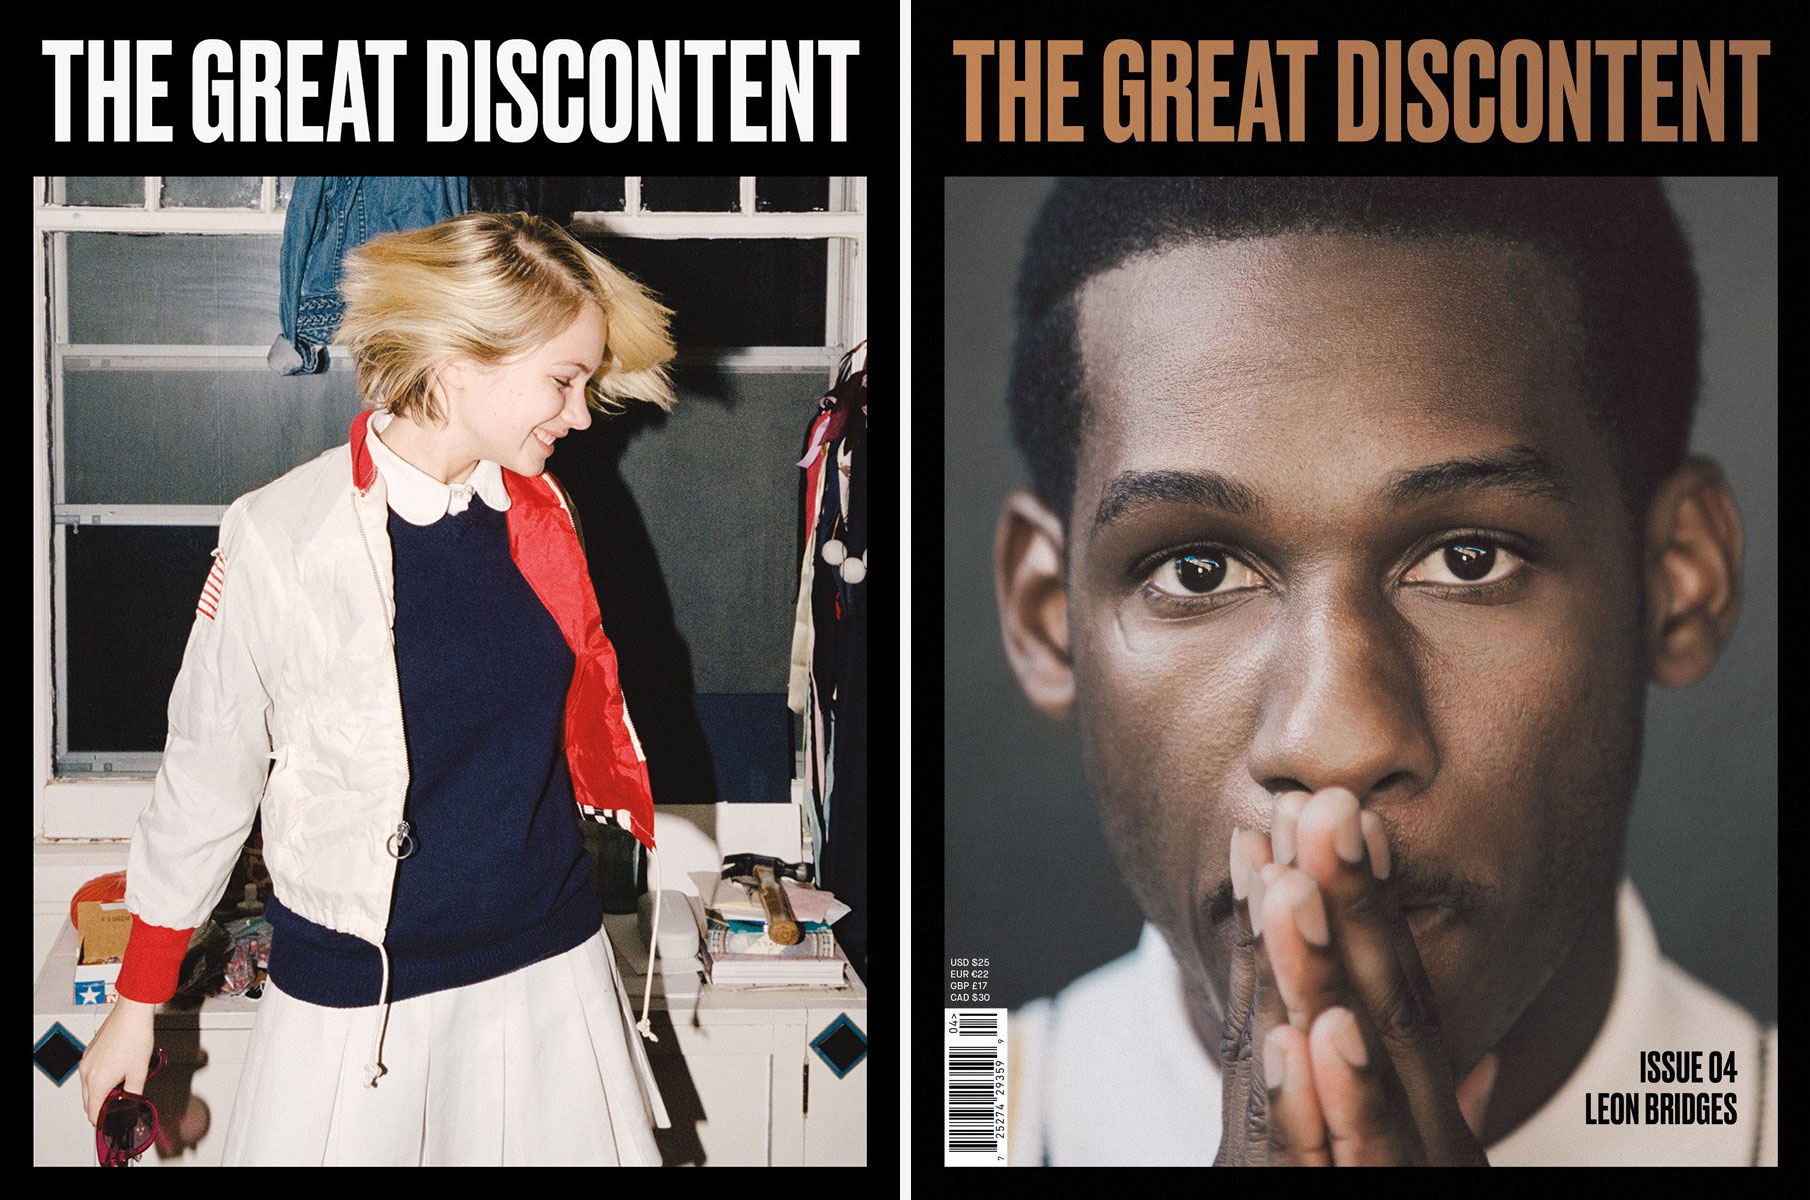 The Great Discontent magazine